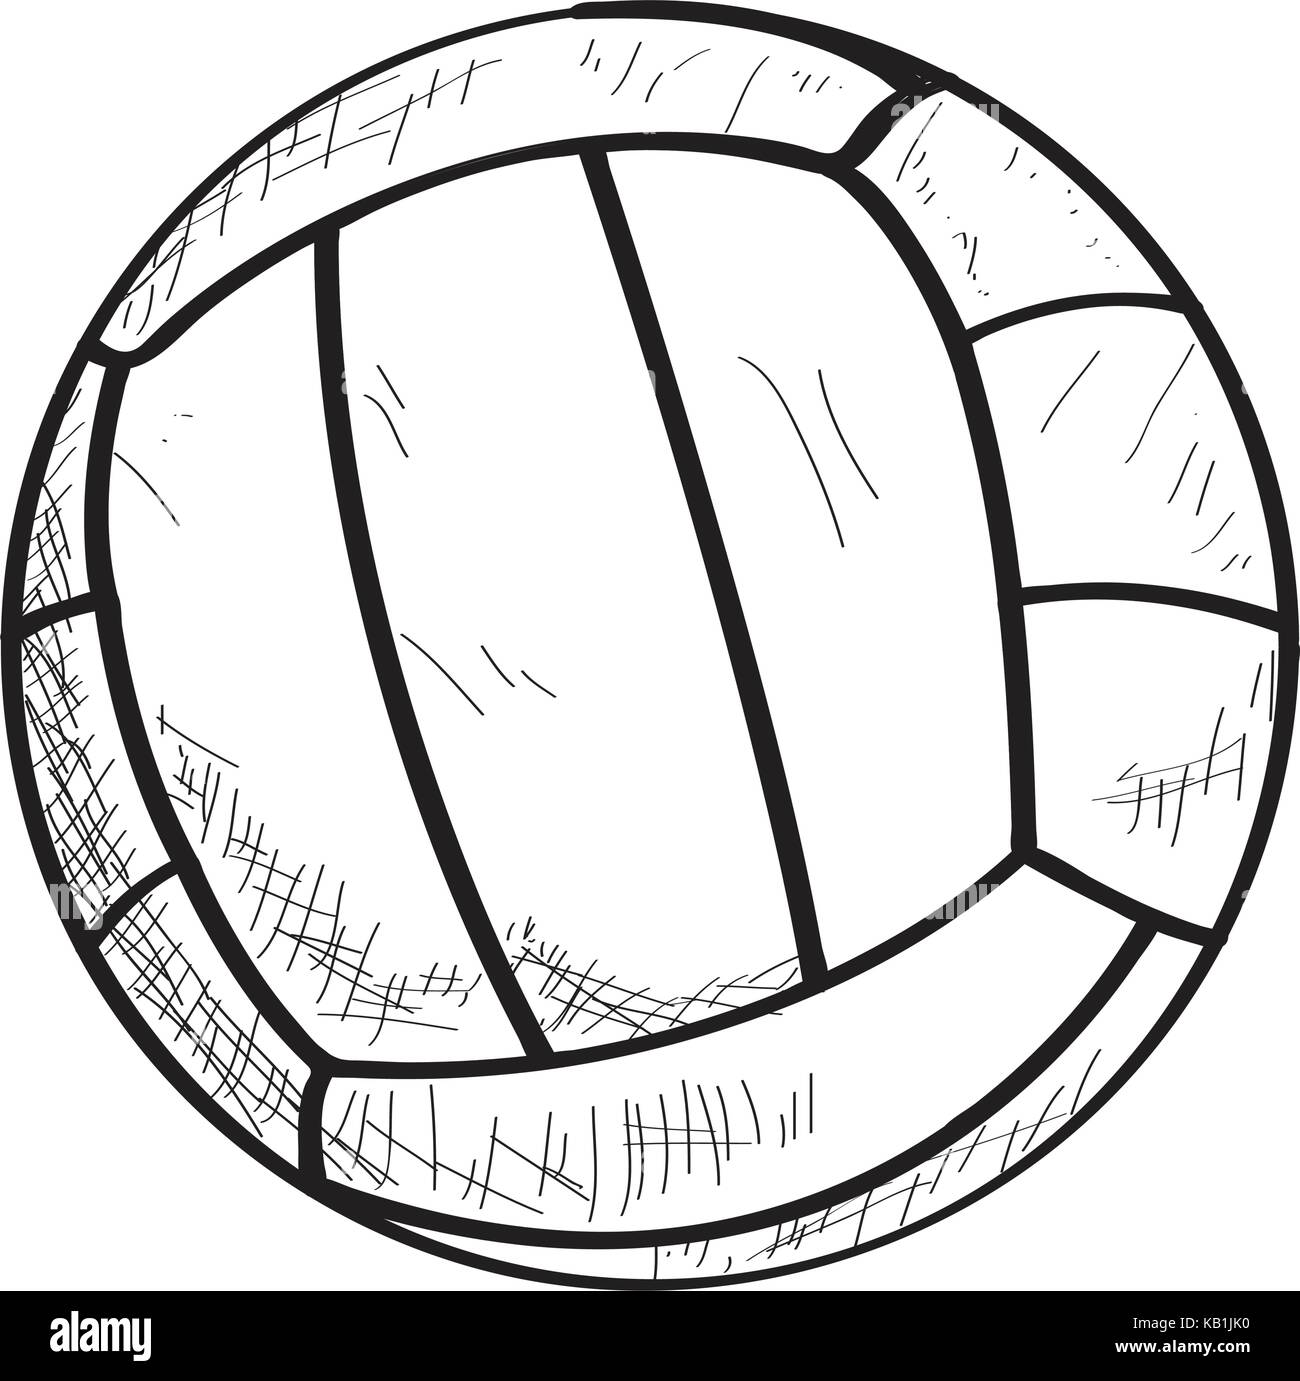 Discover more than 163 volleyball sketch latest - in.eteachers